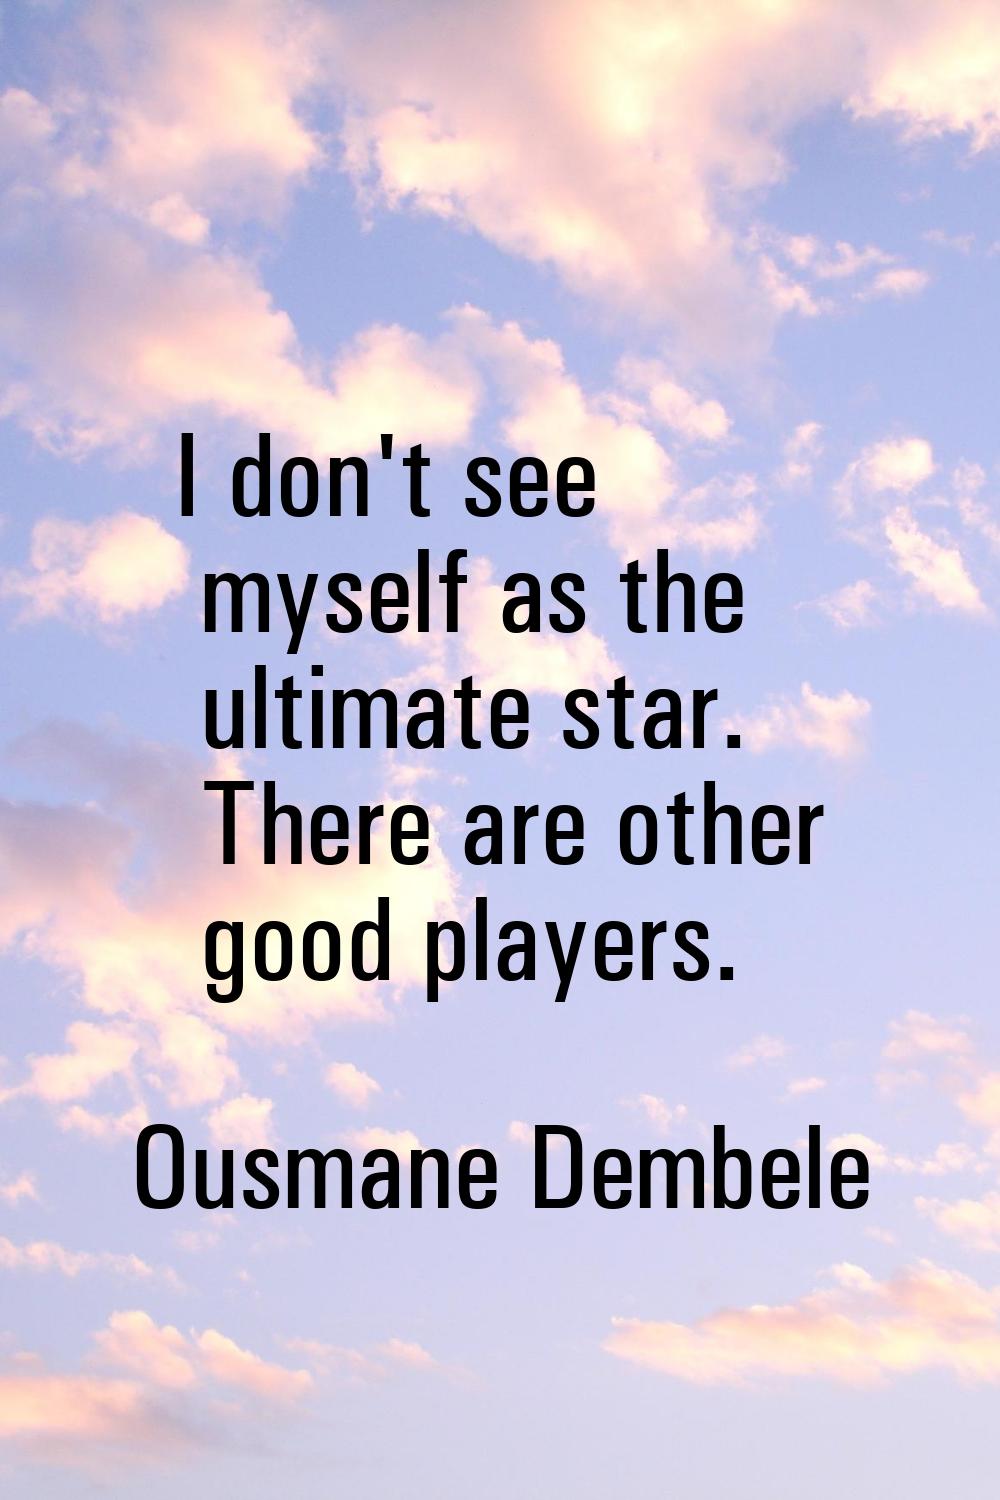 I don't see myself as the ultimate star. There are other good players.